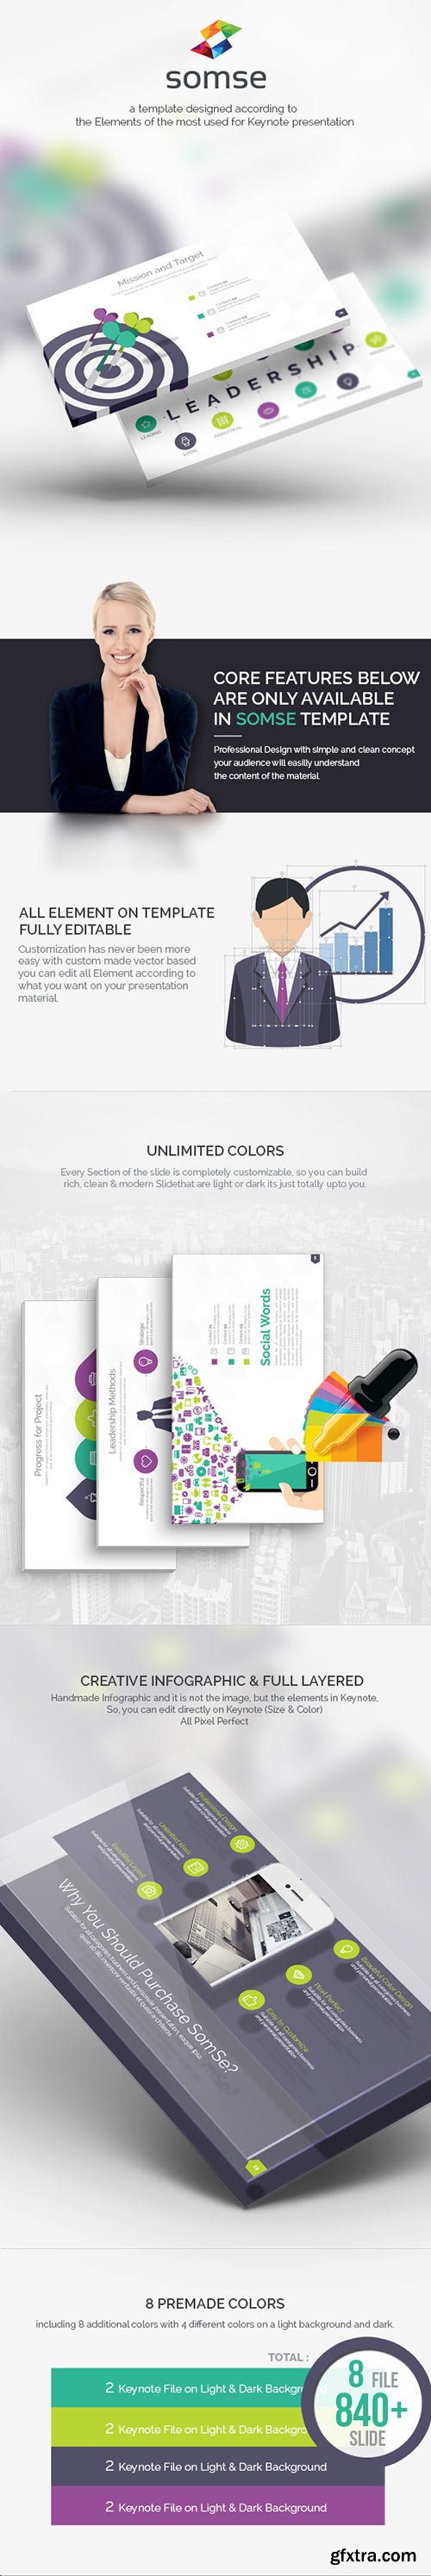 Graphicriver - Somse - All in One Keynote Template 8893880